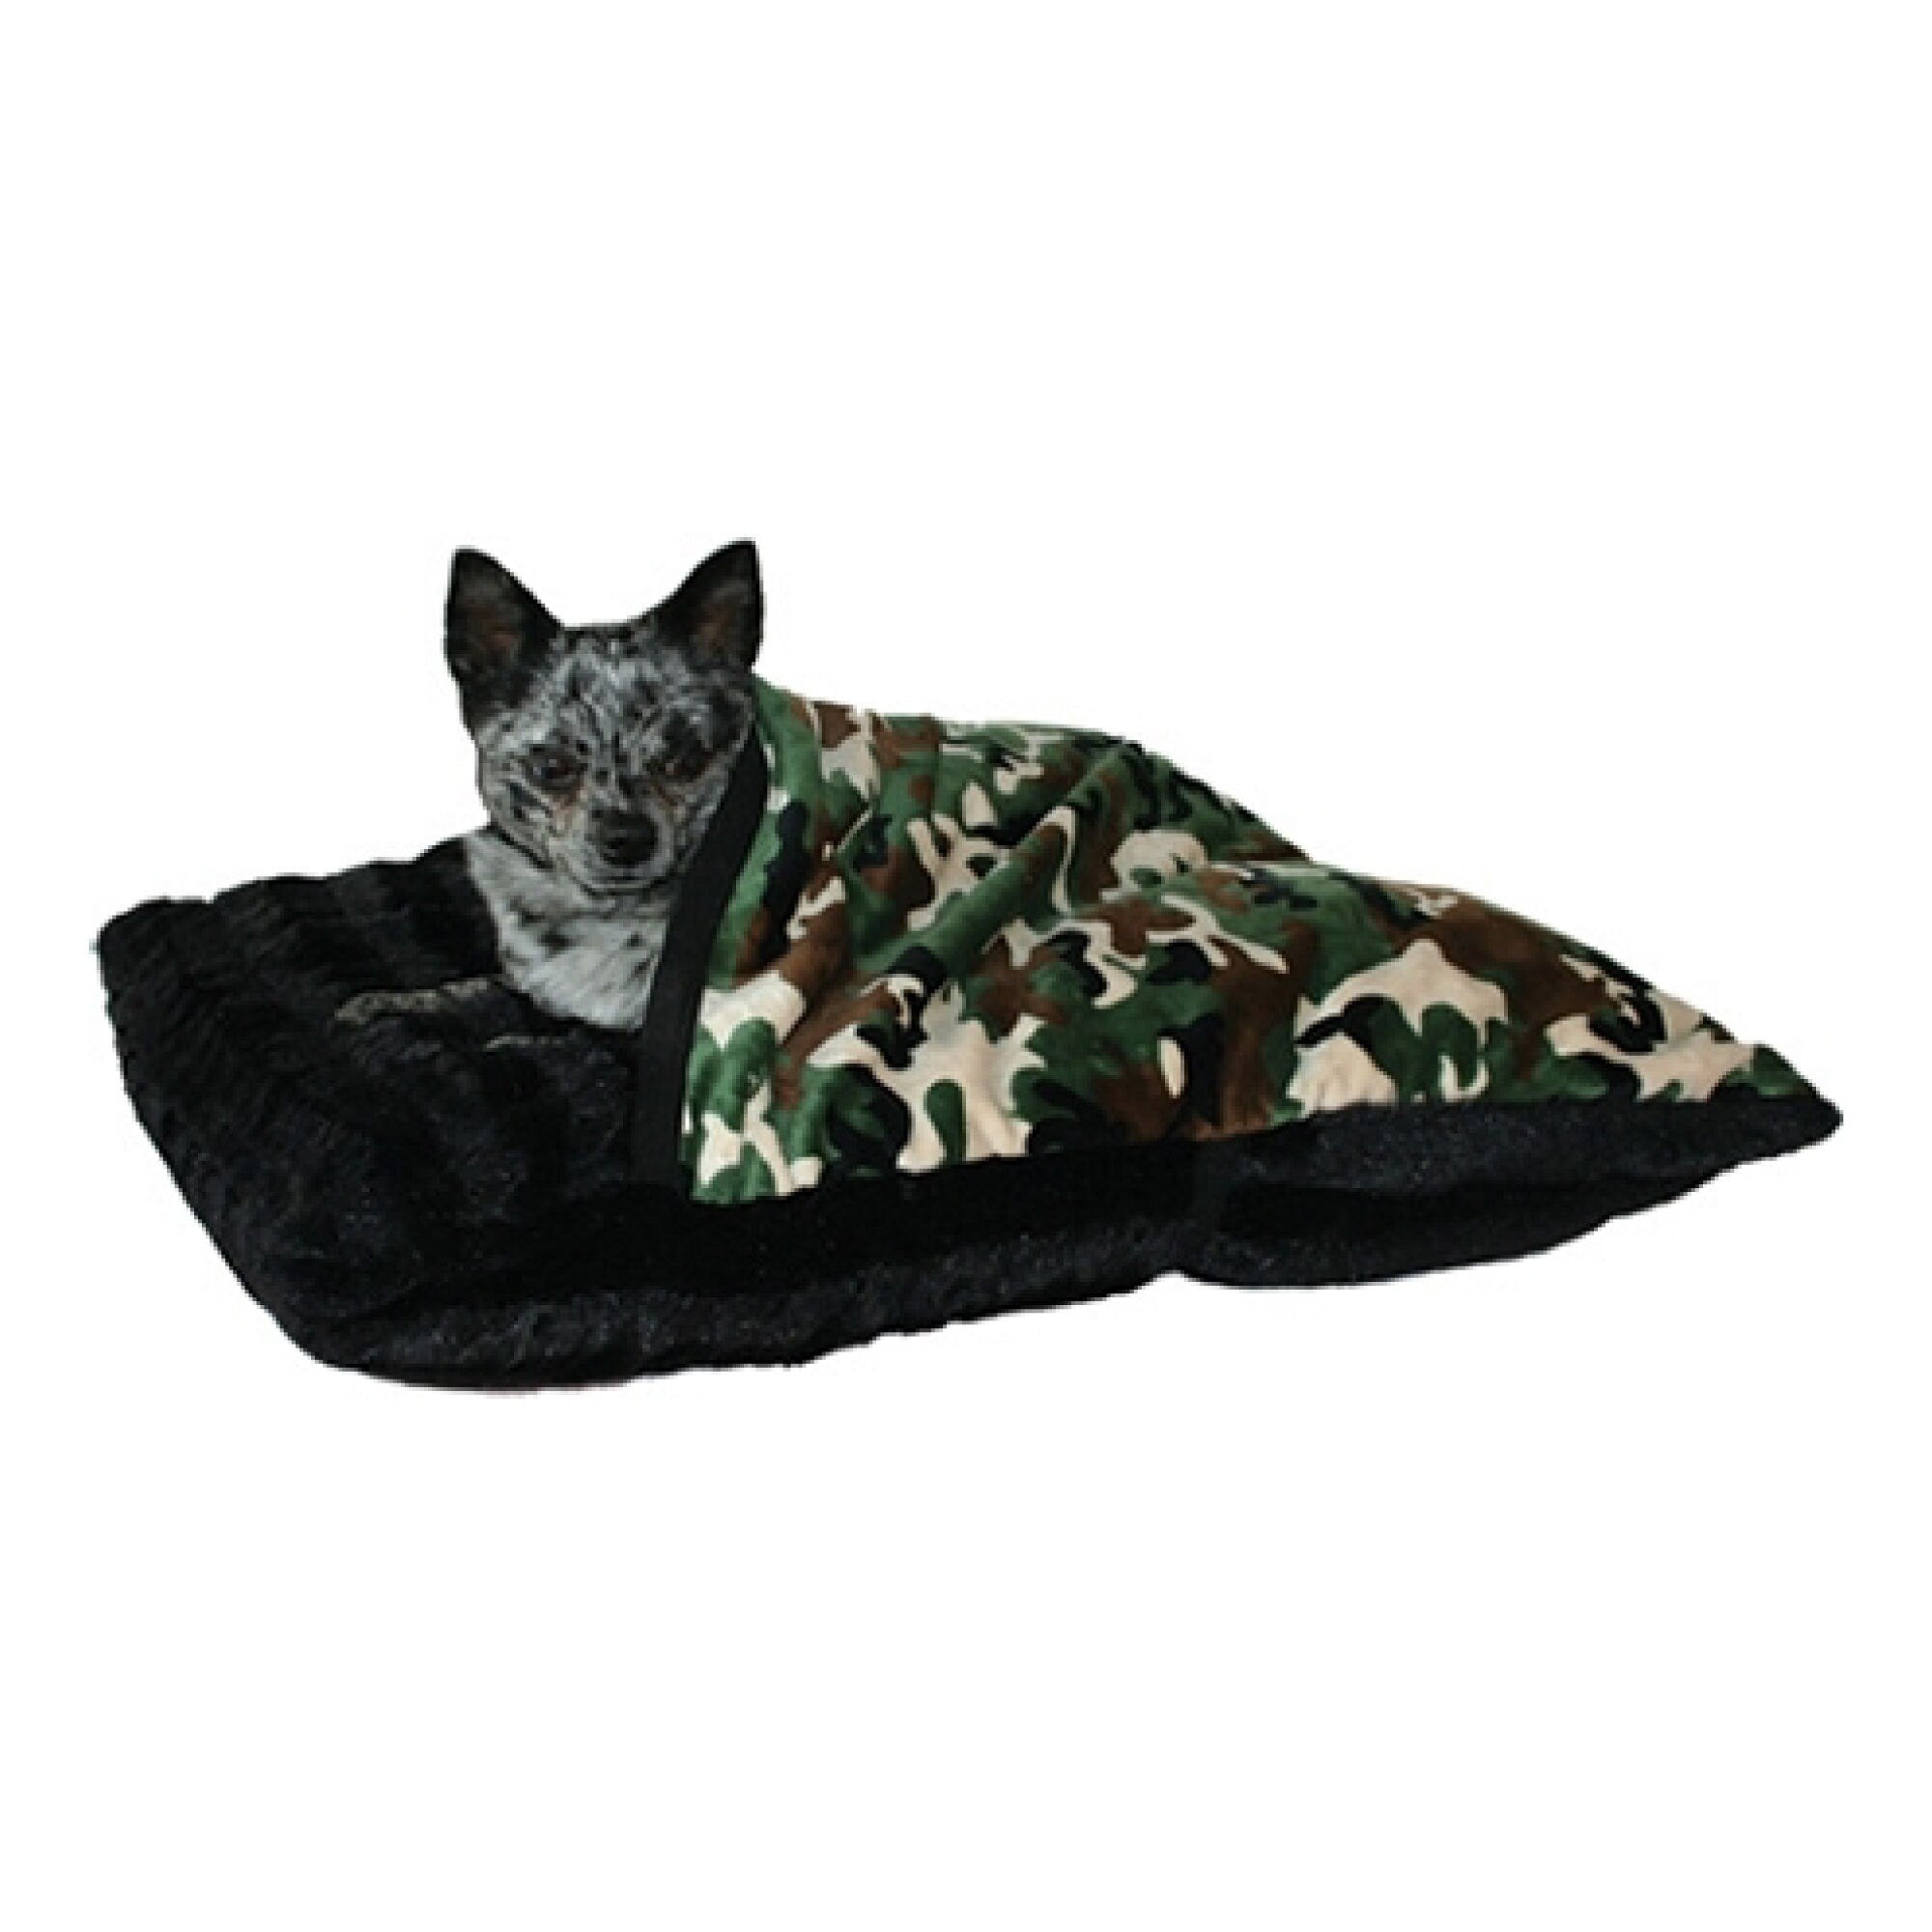 Dog, Puppy & Pet or Cat Sleepytime Pet Pockets for Pets that burrow, "Army Camo"